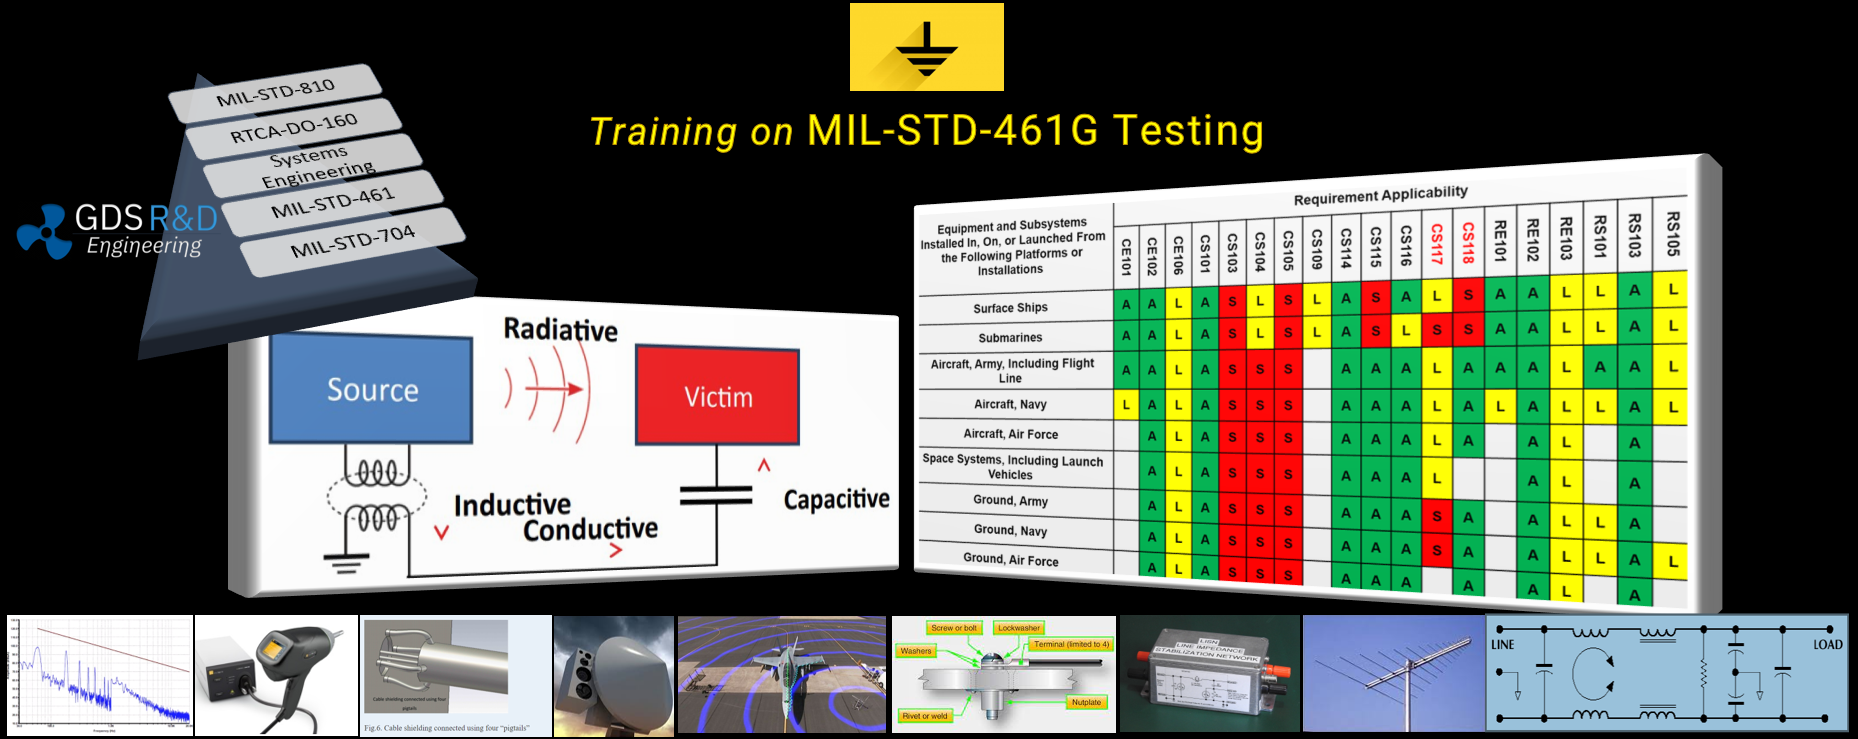 Online Training on MIL-STD-810H, RTCA-DO-160, MIL-STD-461G Environmental Testing of Products, provided by GDS Engineering R&D, Systems Engineering Products and Solutions. Training Led by a Live US-based Sr. Instructor: Dr. Ismail Cicek. Product Verification and Validation Courses for Integrated Systems. C-17 Military Aicraft. FAA/EASA. US DoD. Safety First. US Army. US Air Force and US Navy Tailoring Examples for Mission and Environmental Profile. Setting Test Limits and Durations are Explained. How to evaluate test results and mitigate the risk (Risk Assessment Matrix). Aircafft Equipment, Devices, Plugs, Machinary, Engines, Compressors, or Carry-on. European CE Time Schedule.